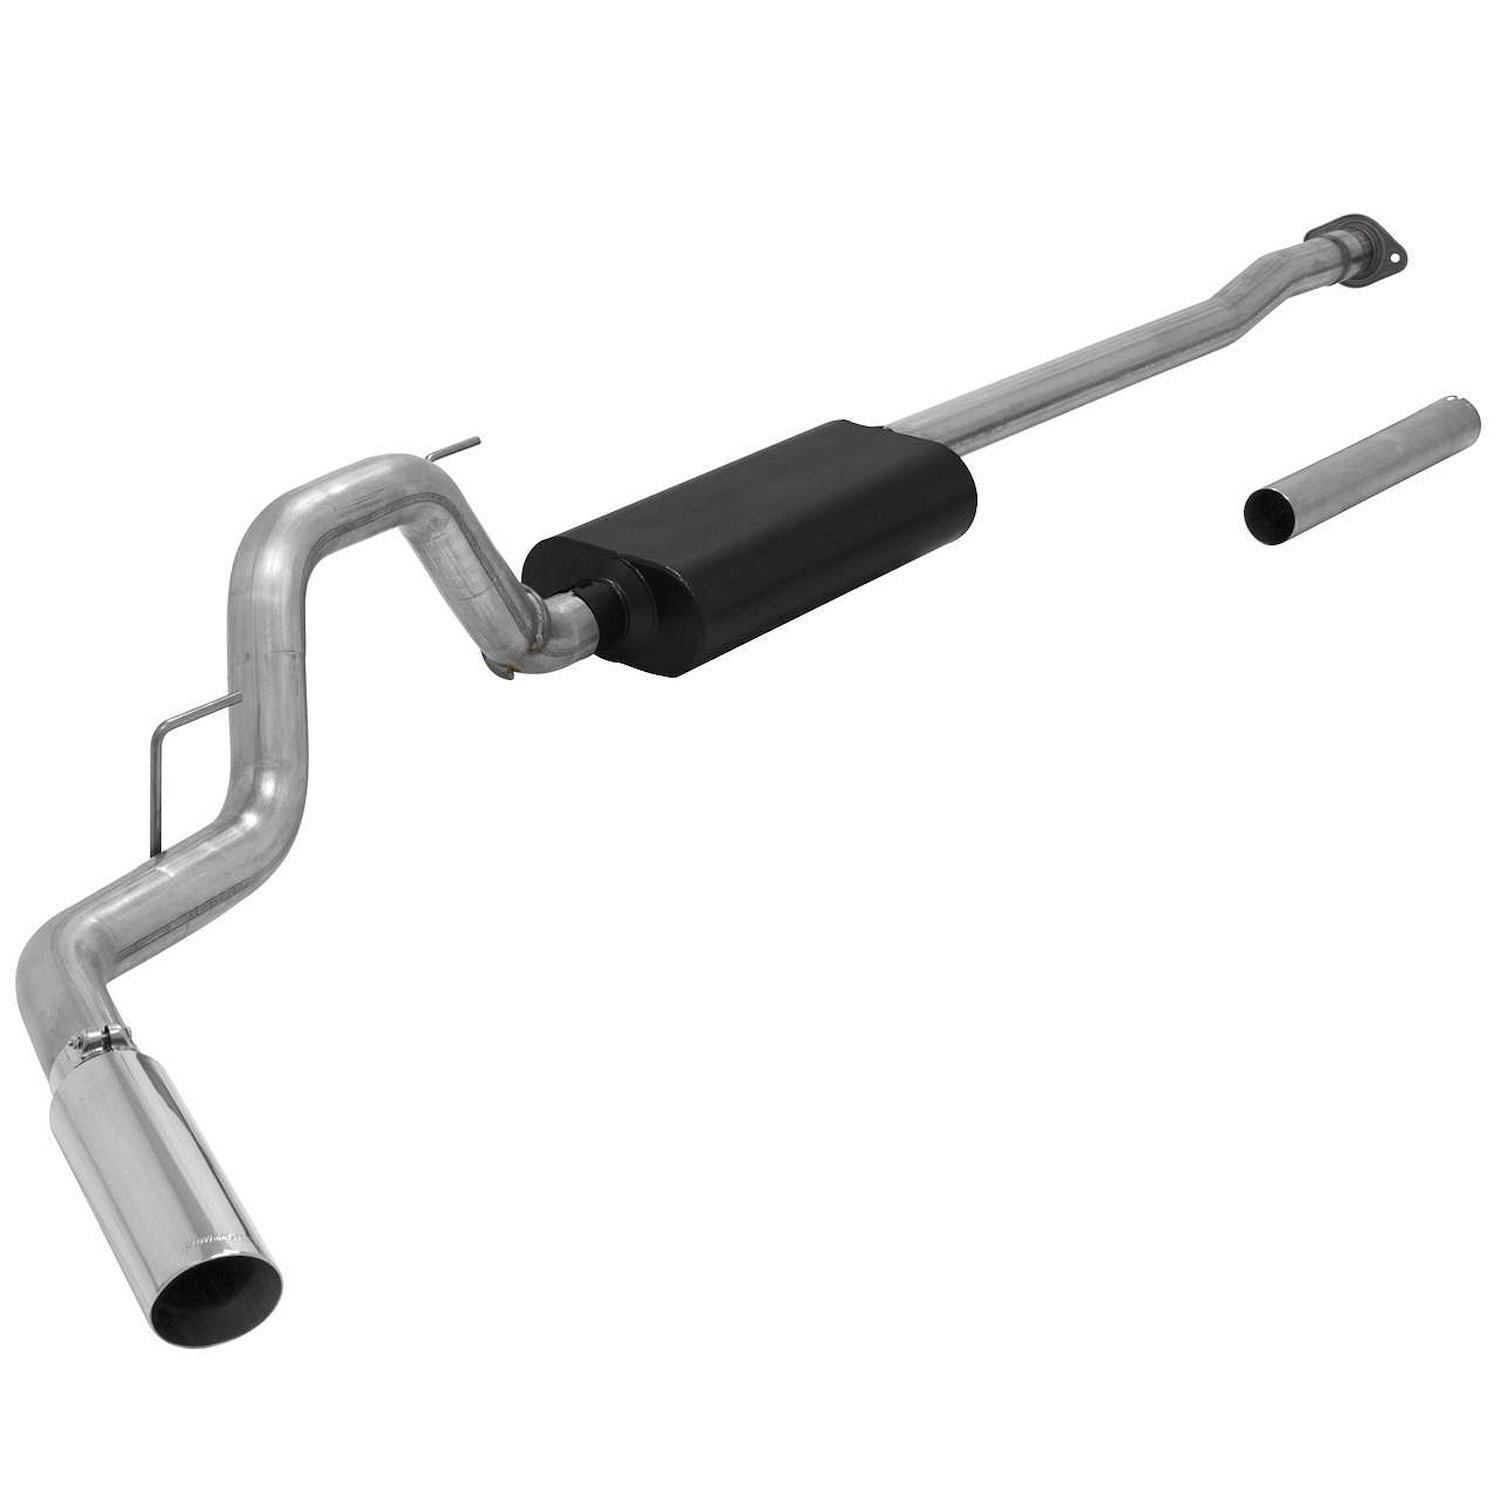 Force II Cat-Back Exhaust System 2015-2019 Ford F-150 2.7L/3.5L EcoBoost, 3.5L TiVCT or 5.0L